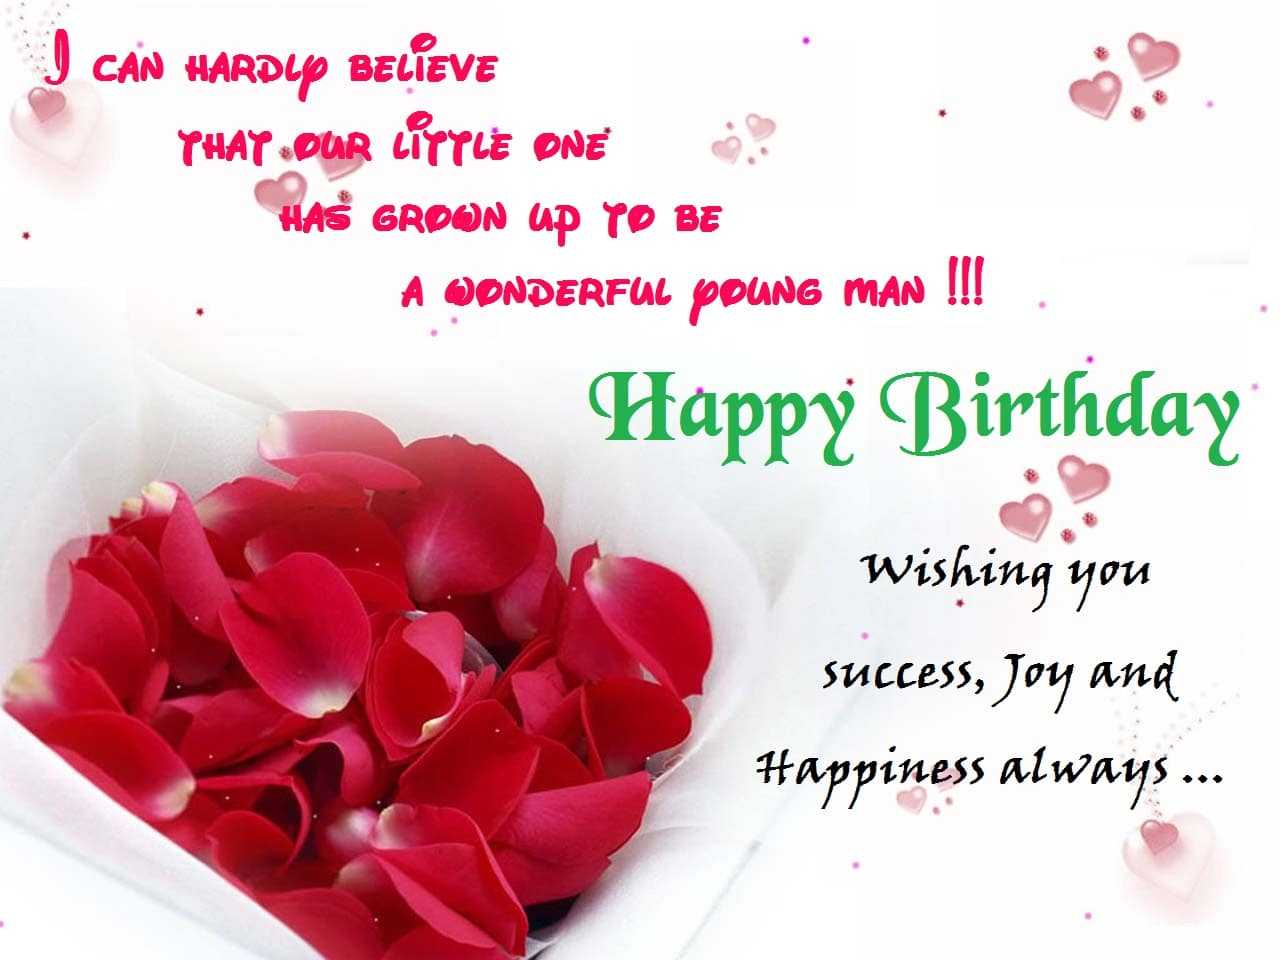 Happy Birthday Wishes For Husband Images Free Download I Can Hardly Believe That